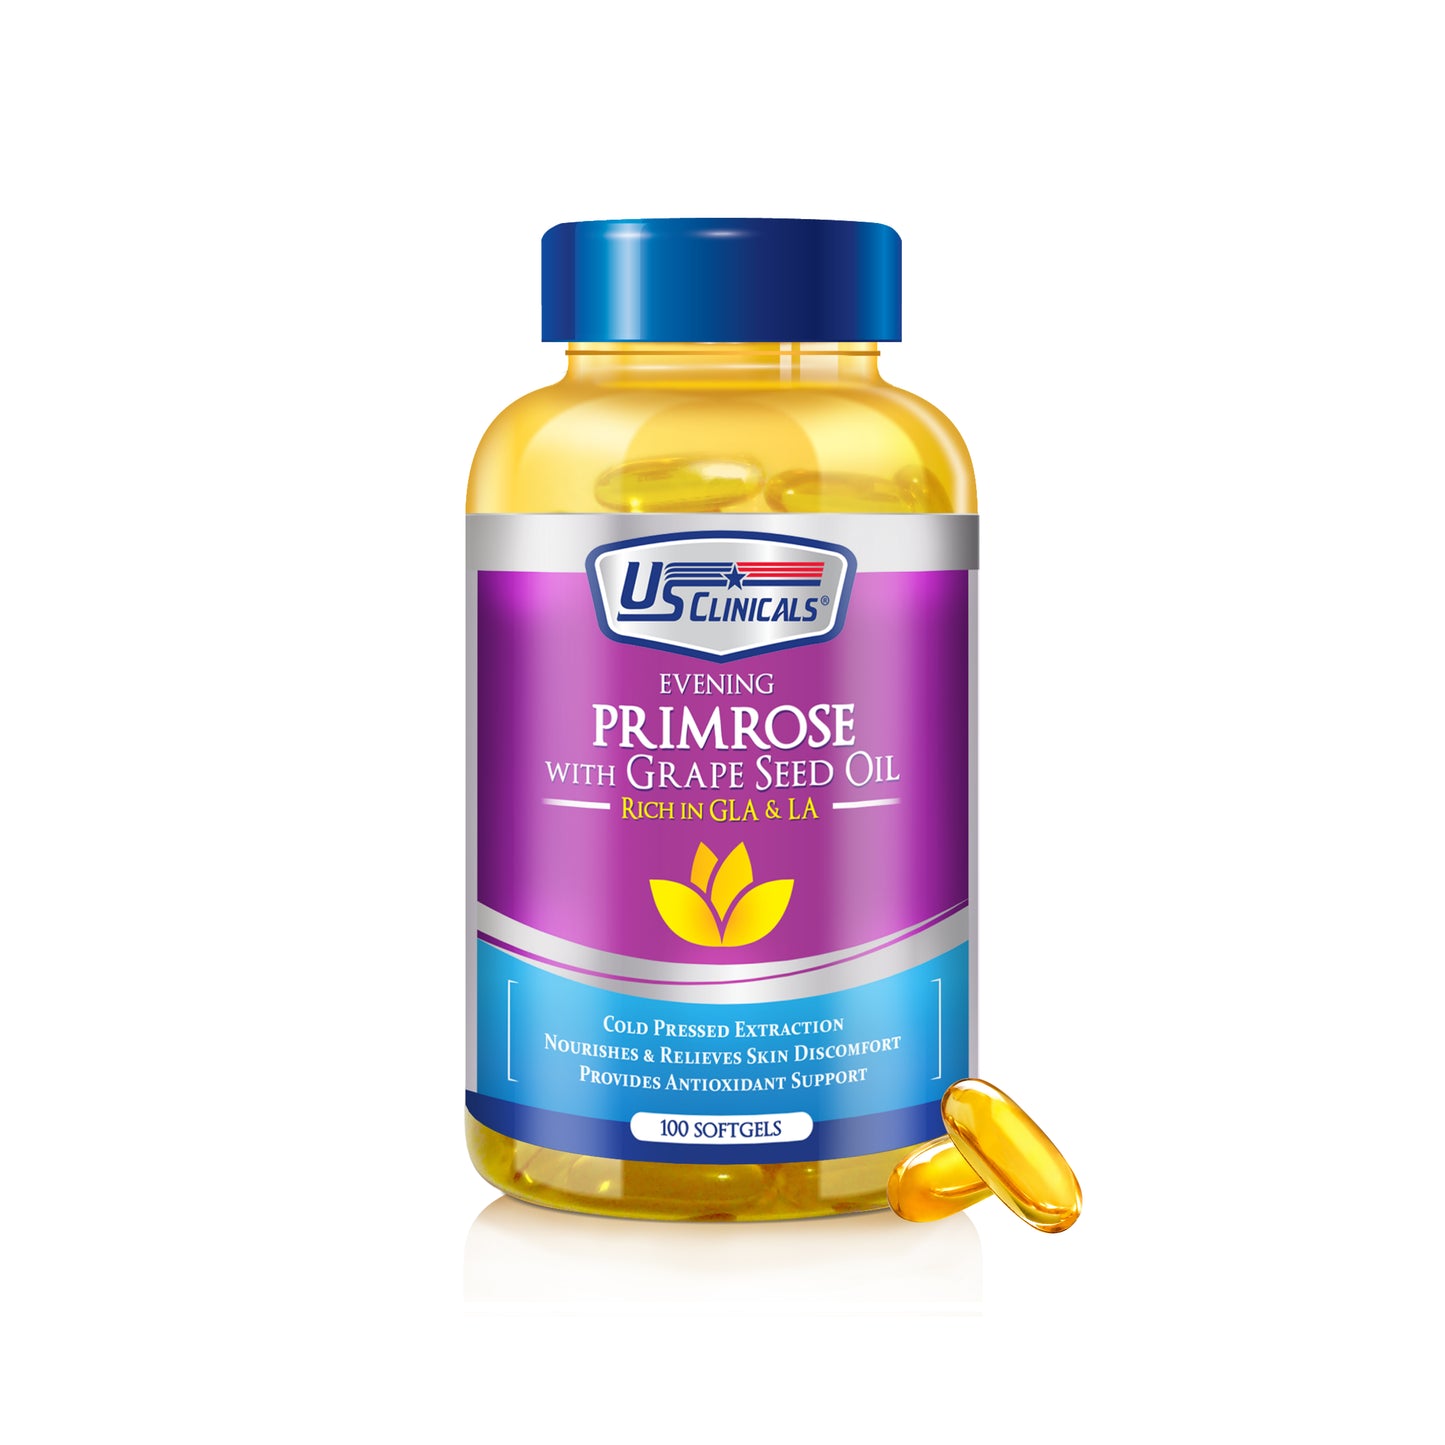 US Clinicals® Evening Primrose with Grape Seed Oil